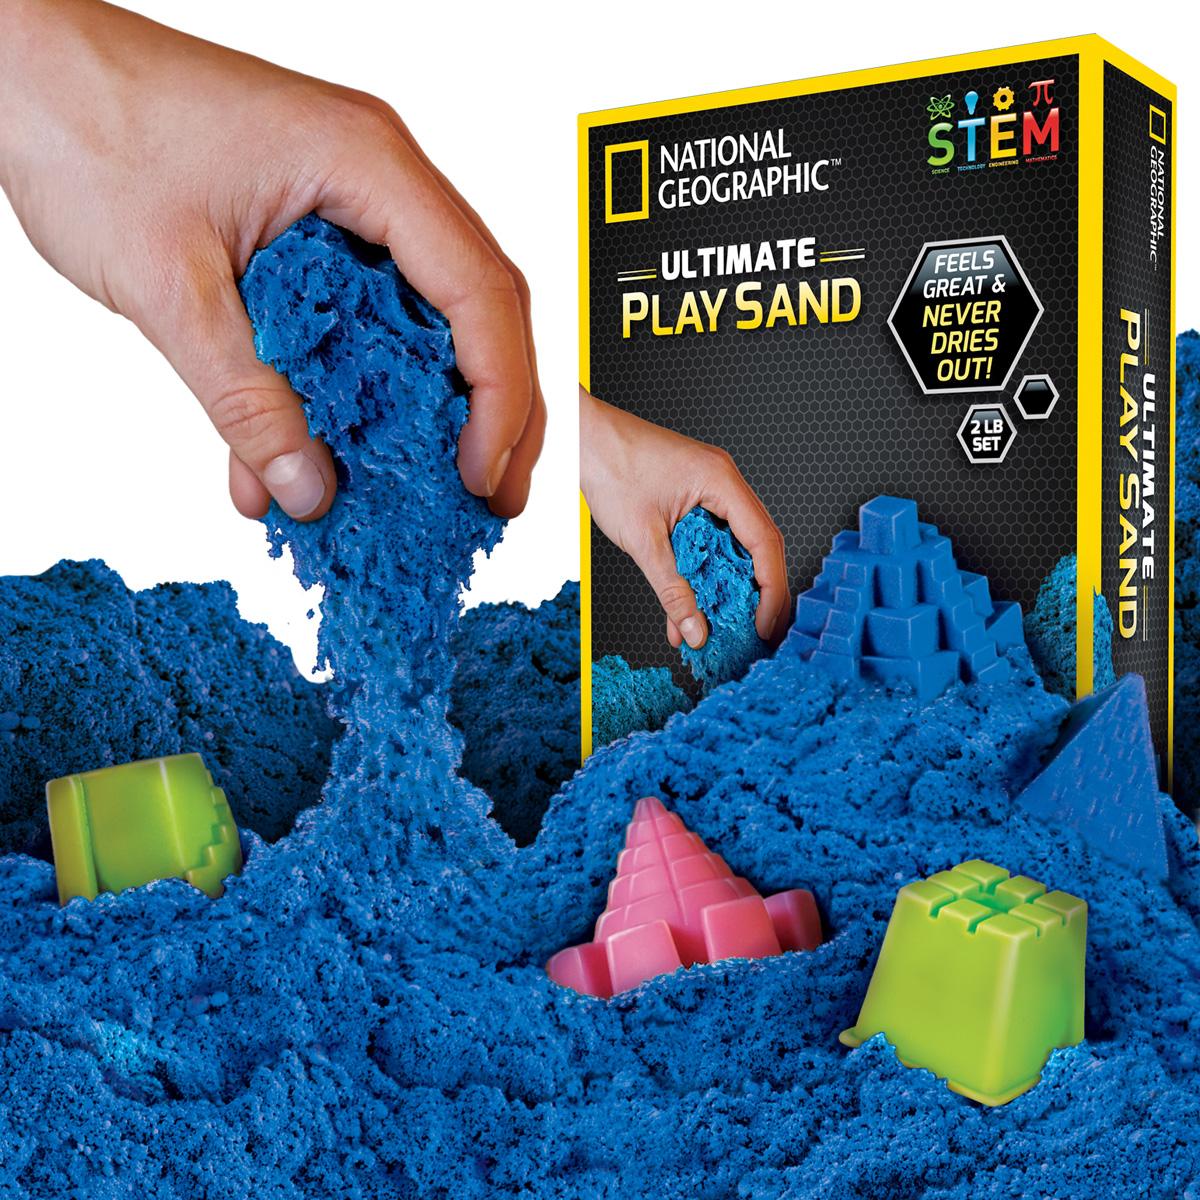 2Lbs National Geographic Ultimate Play Sand for $6.49